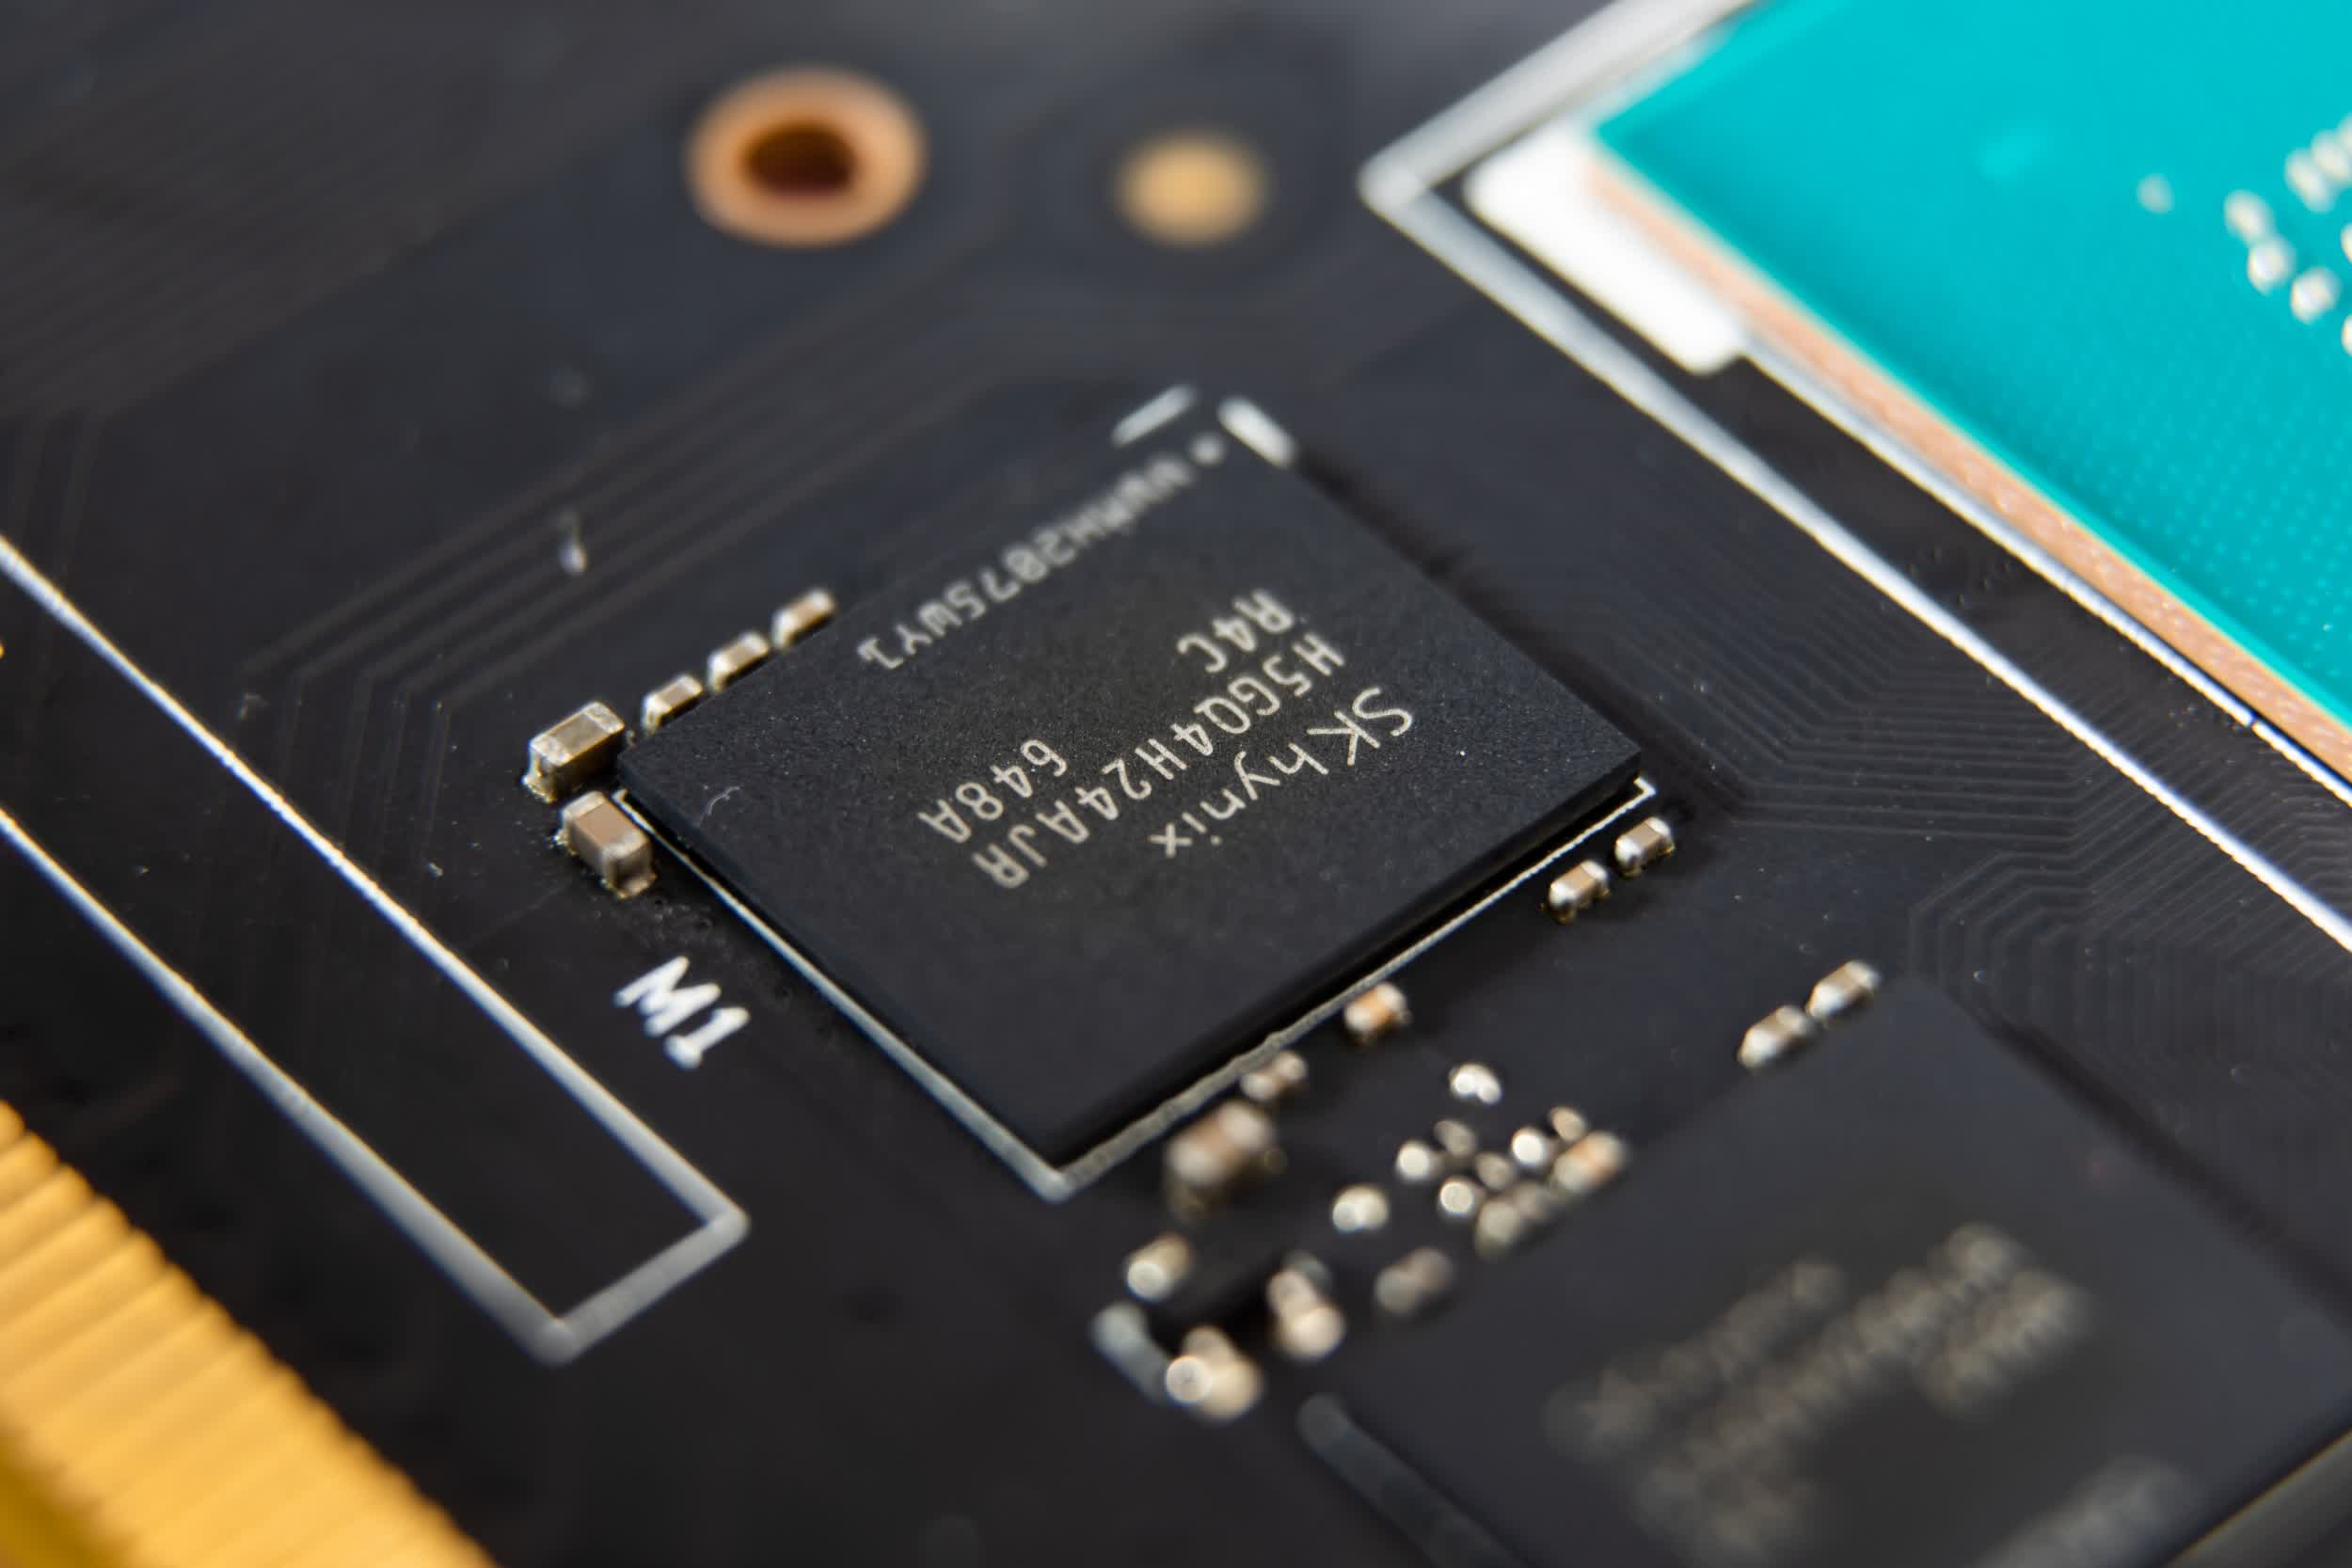 SSD prices to fall 10-15 percent in Q4 as memory market remains saturated